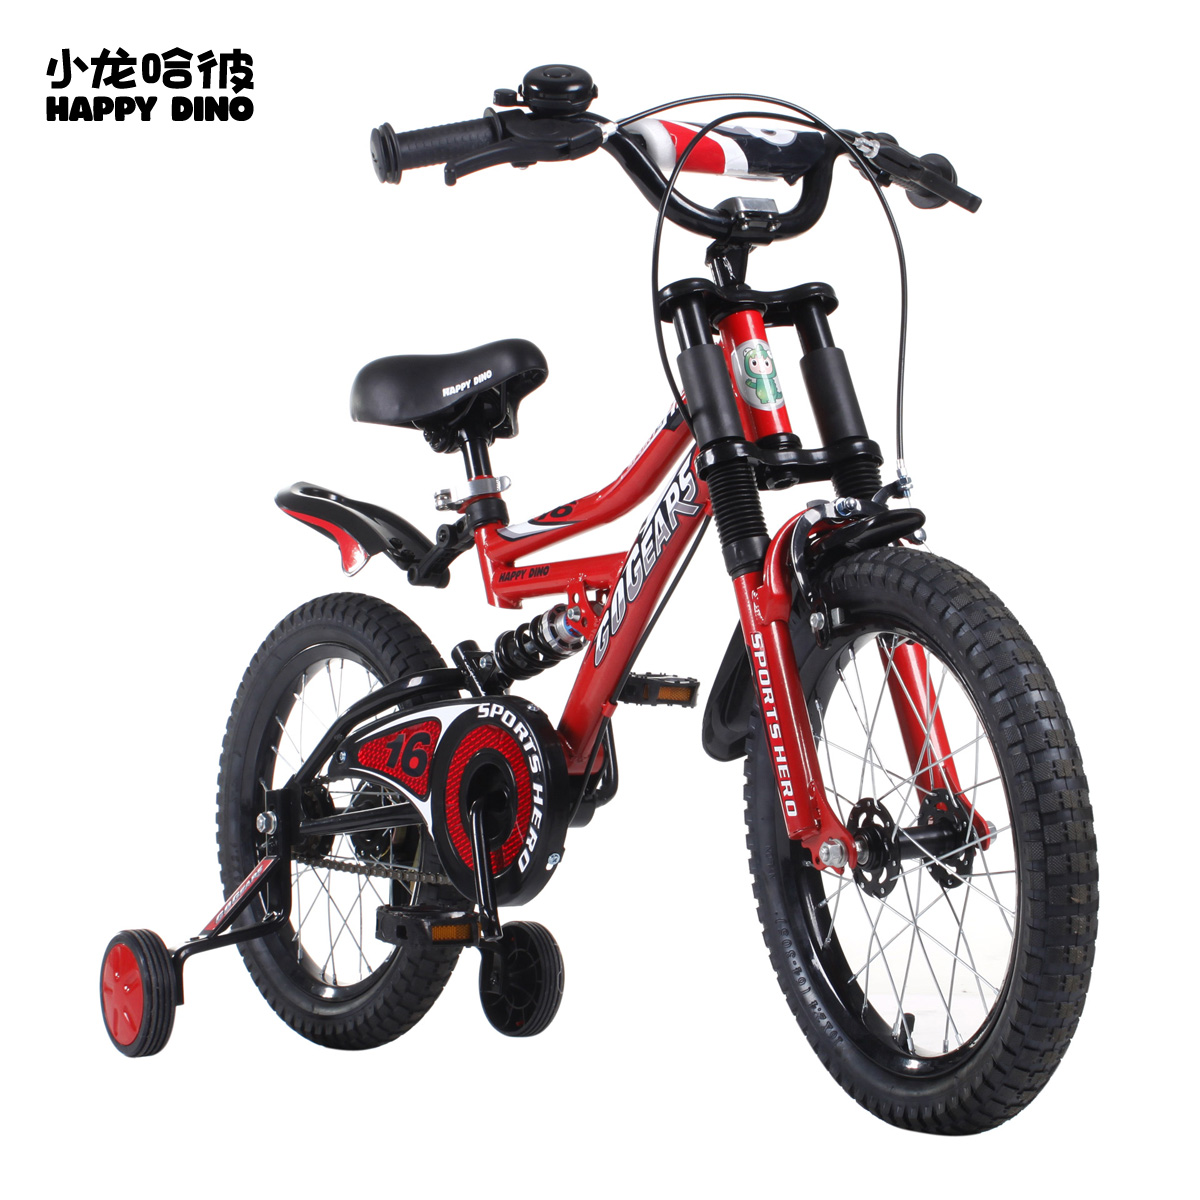 World famous brand Happy Dion double shock widened tire wear 16 inch children bicycle LB1696 Free